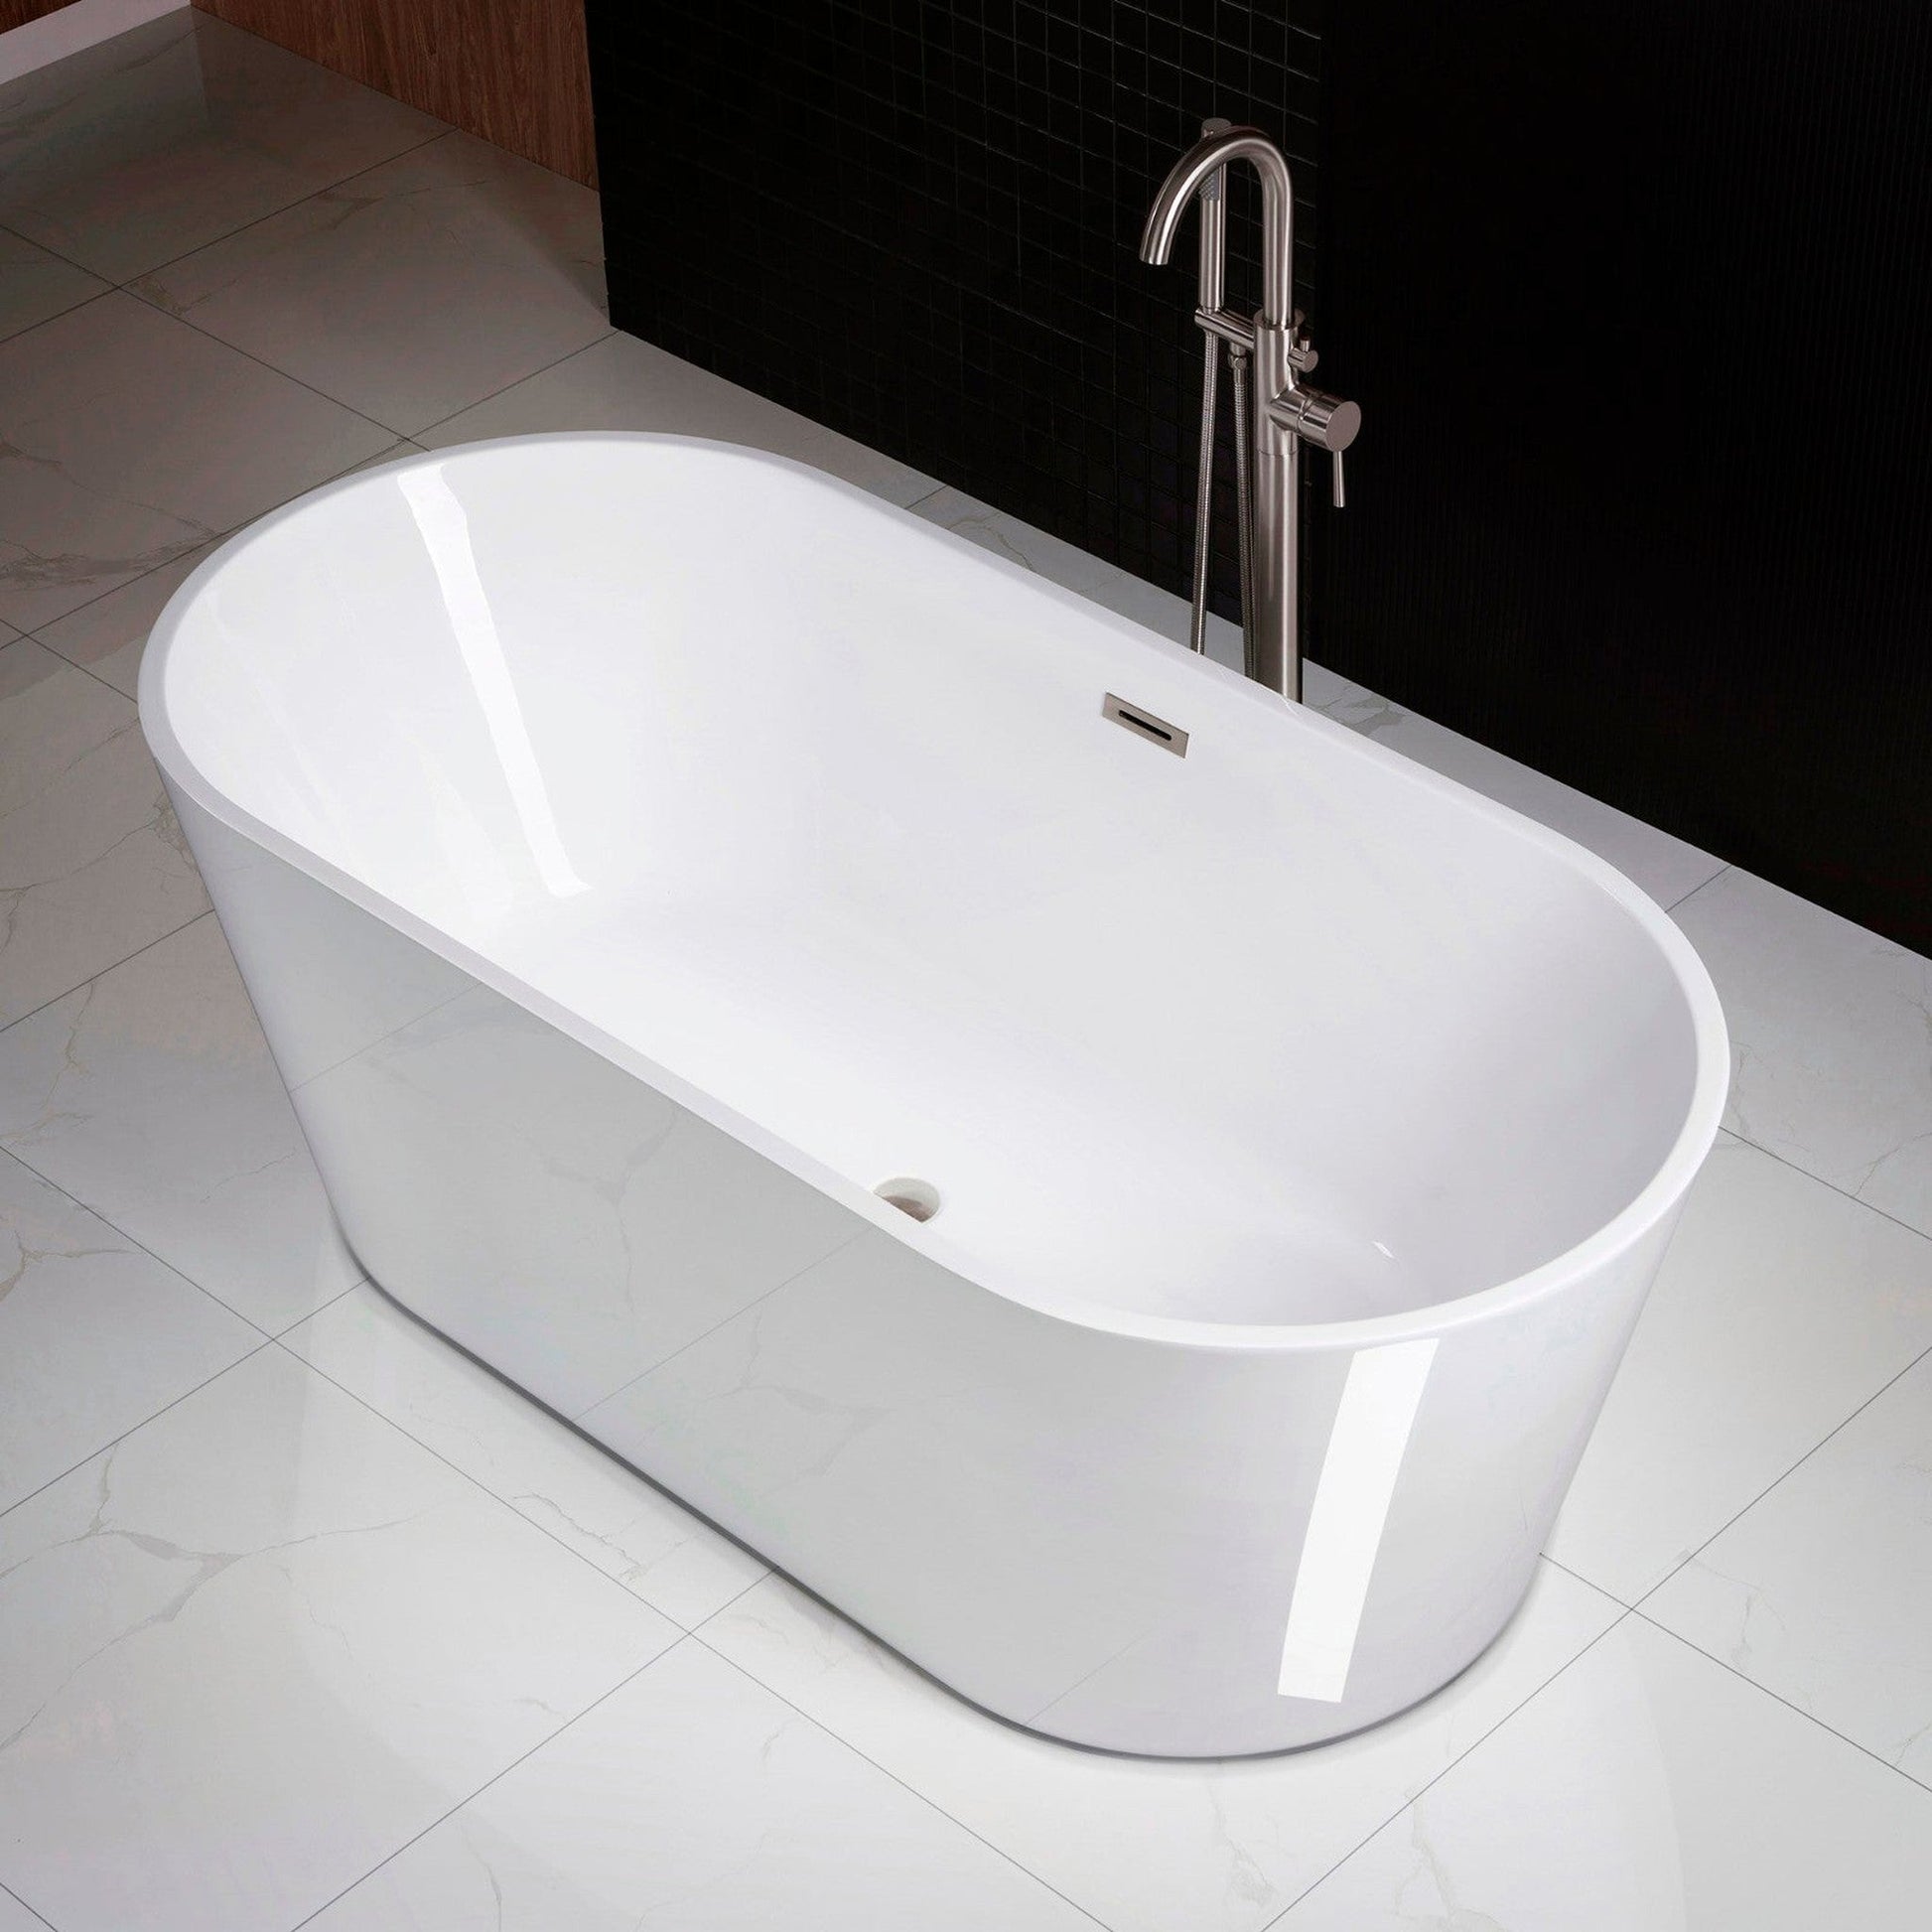 WoodBridge 71" White Acrylic Freestanding Contemporary Soaking Bathtub With Brushed Nickel Drain, Overflow, F0023BNVT Tub Filler and Caddy Tray